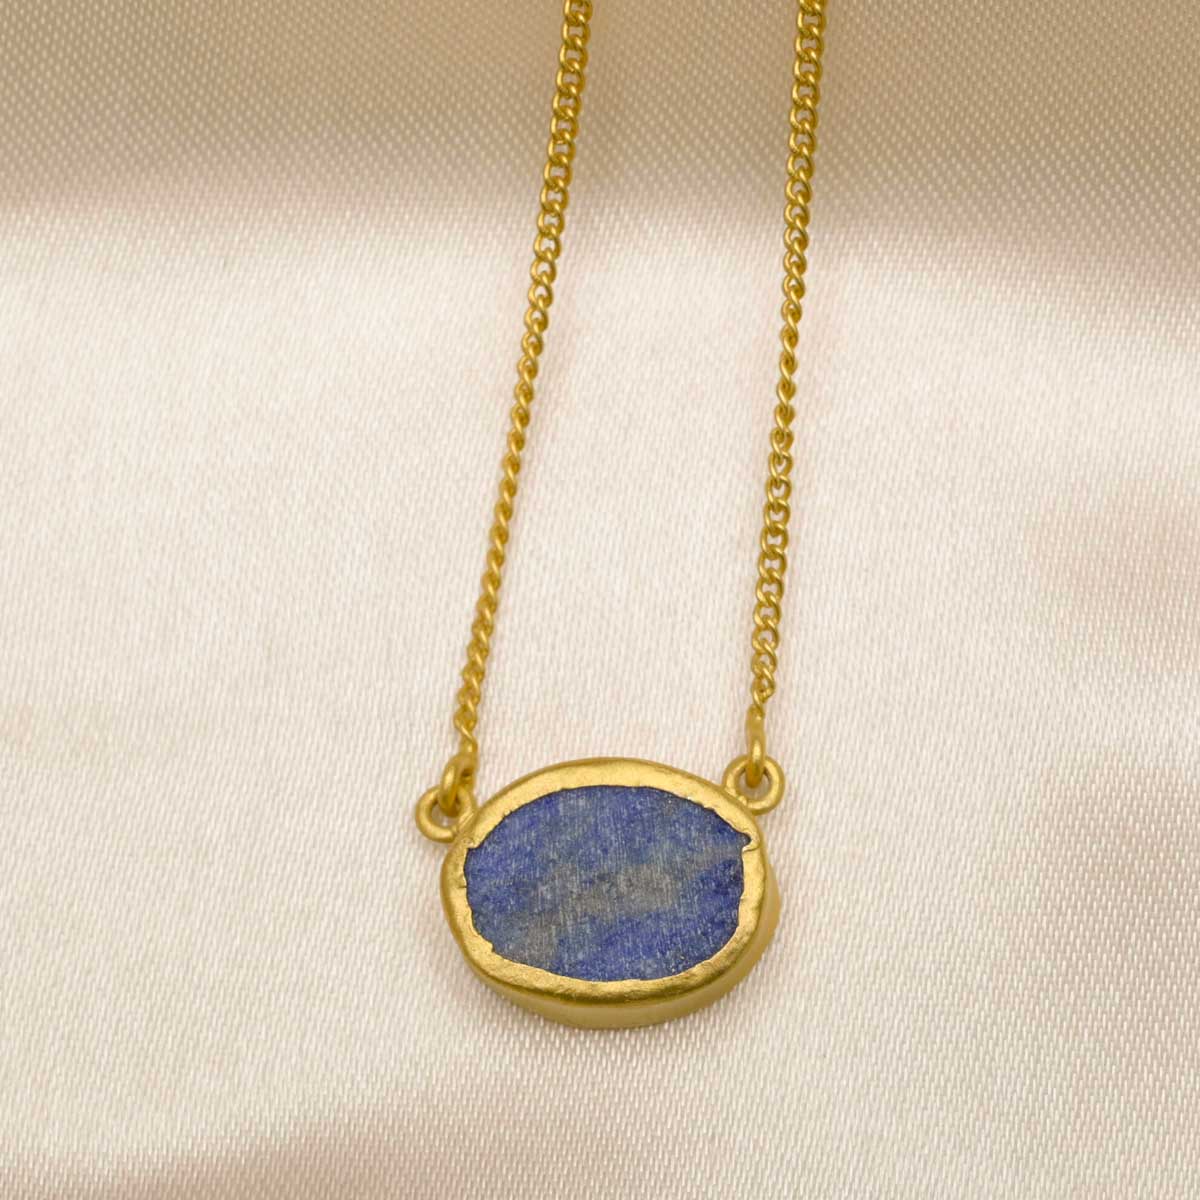 A Touch of Blue Lapis Stone Gold Necklace